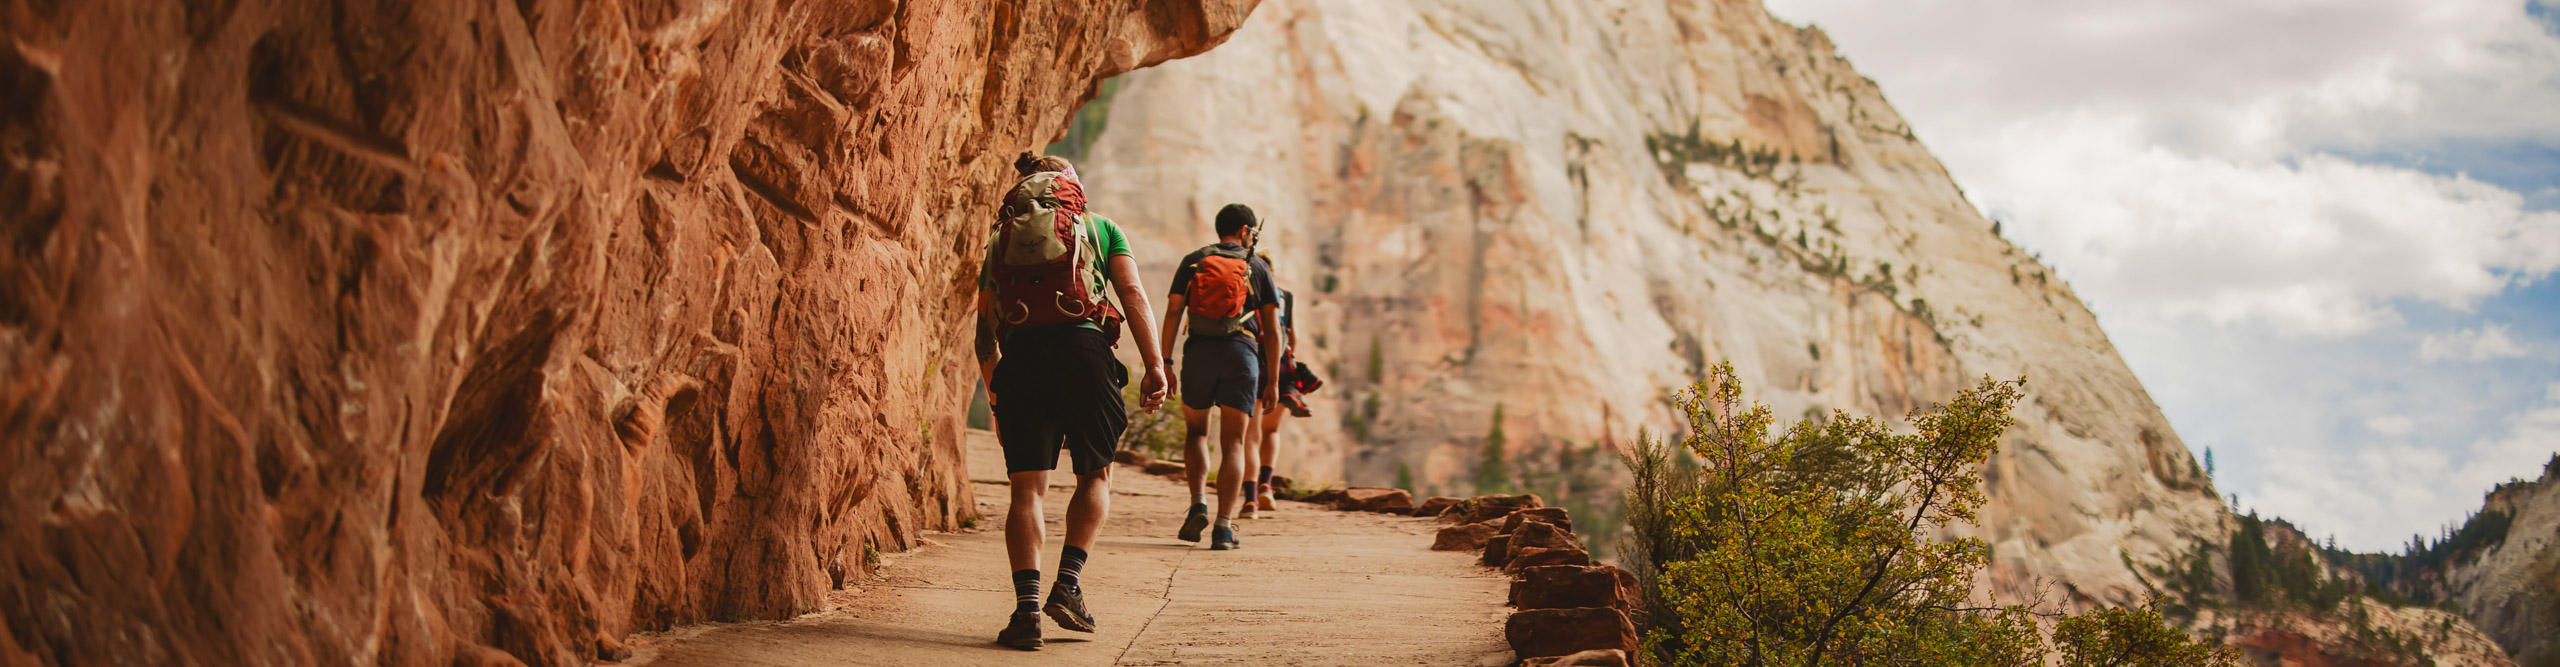 Hikers on a trail in Zion national Park on cloudy day, USA